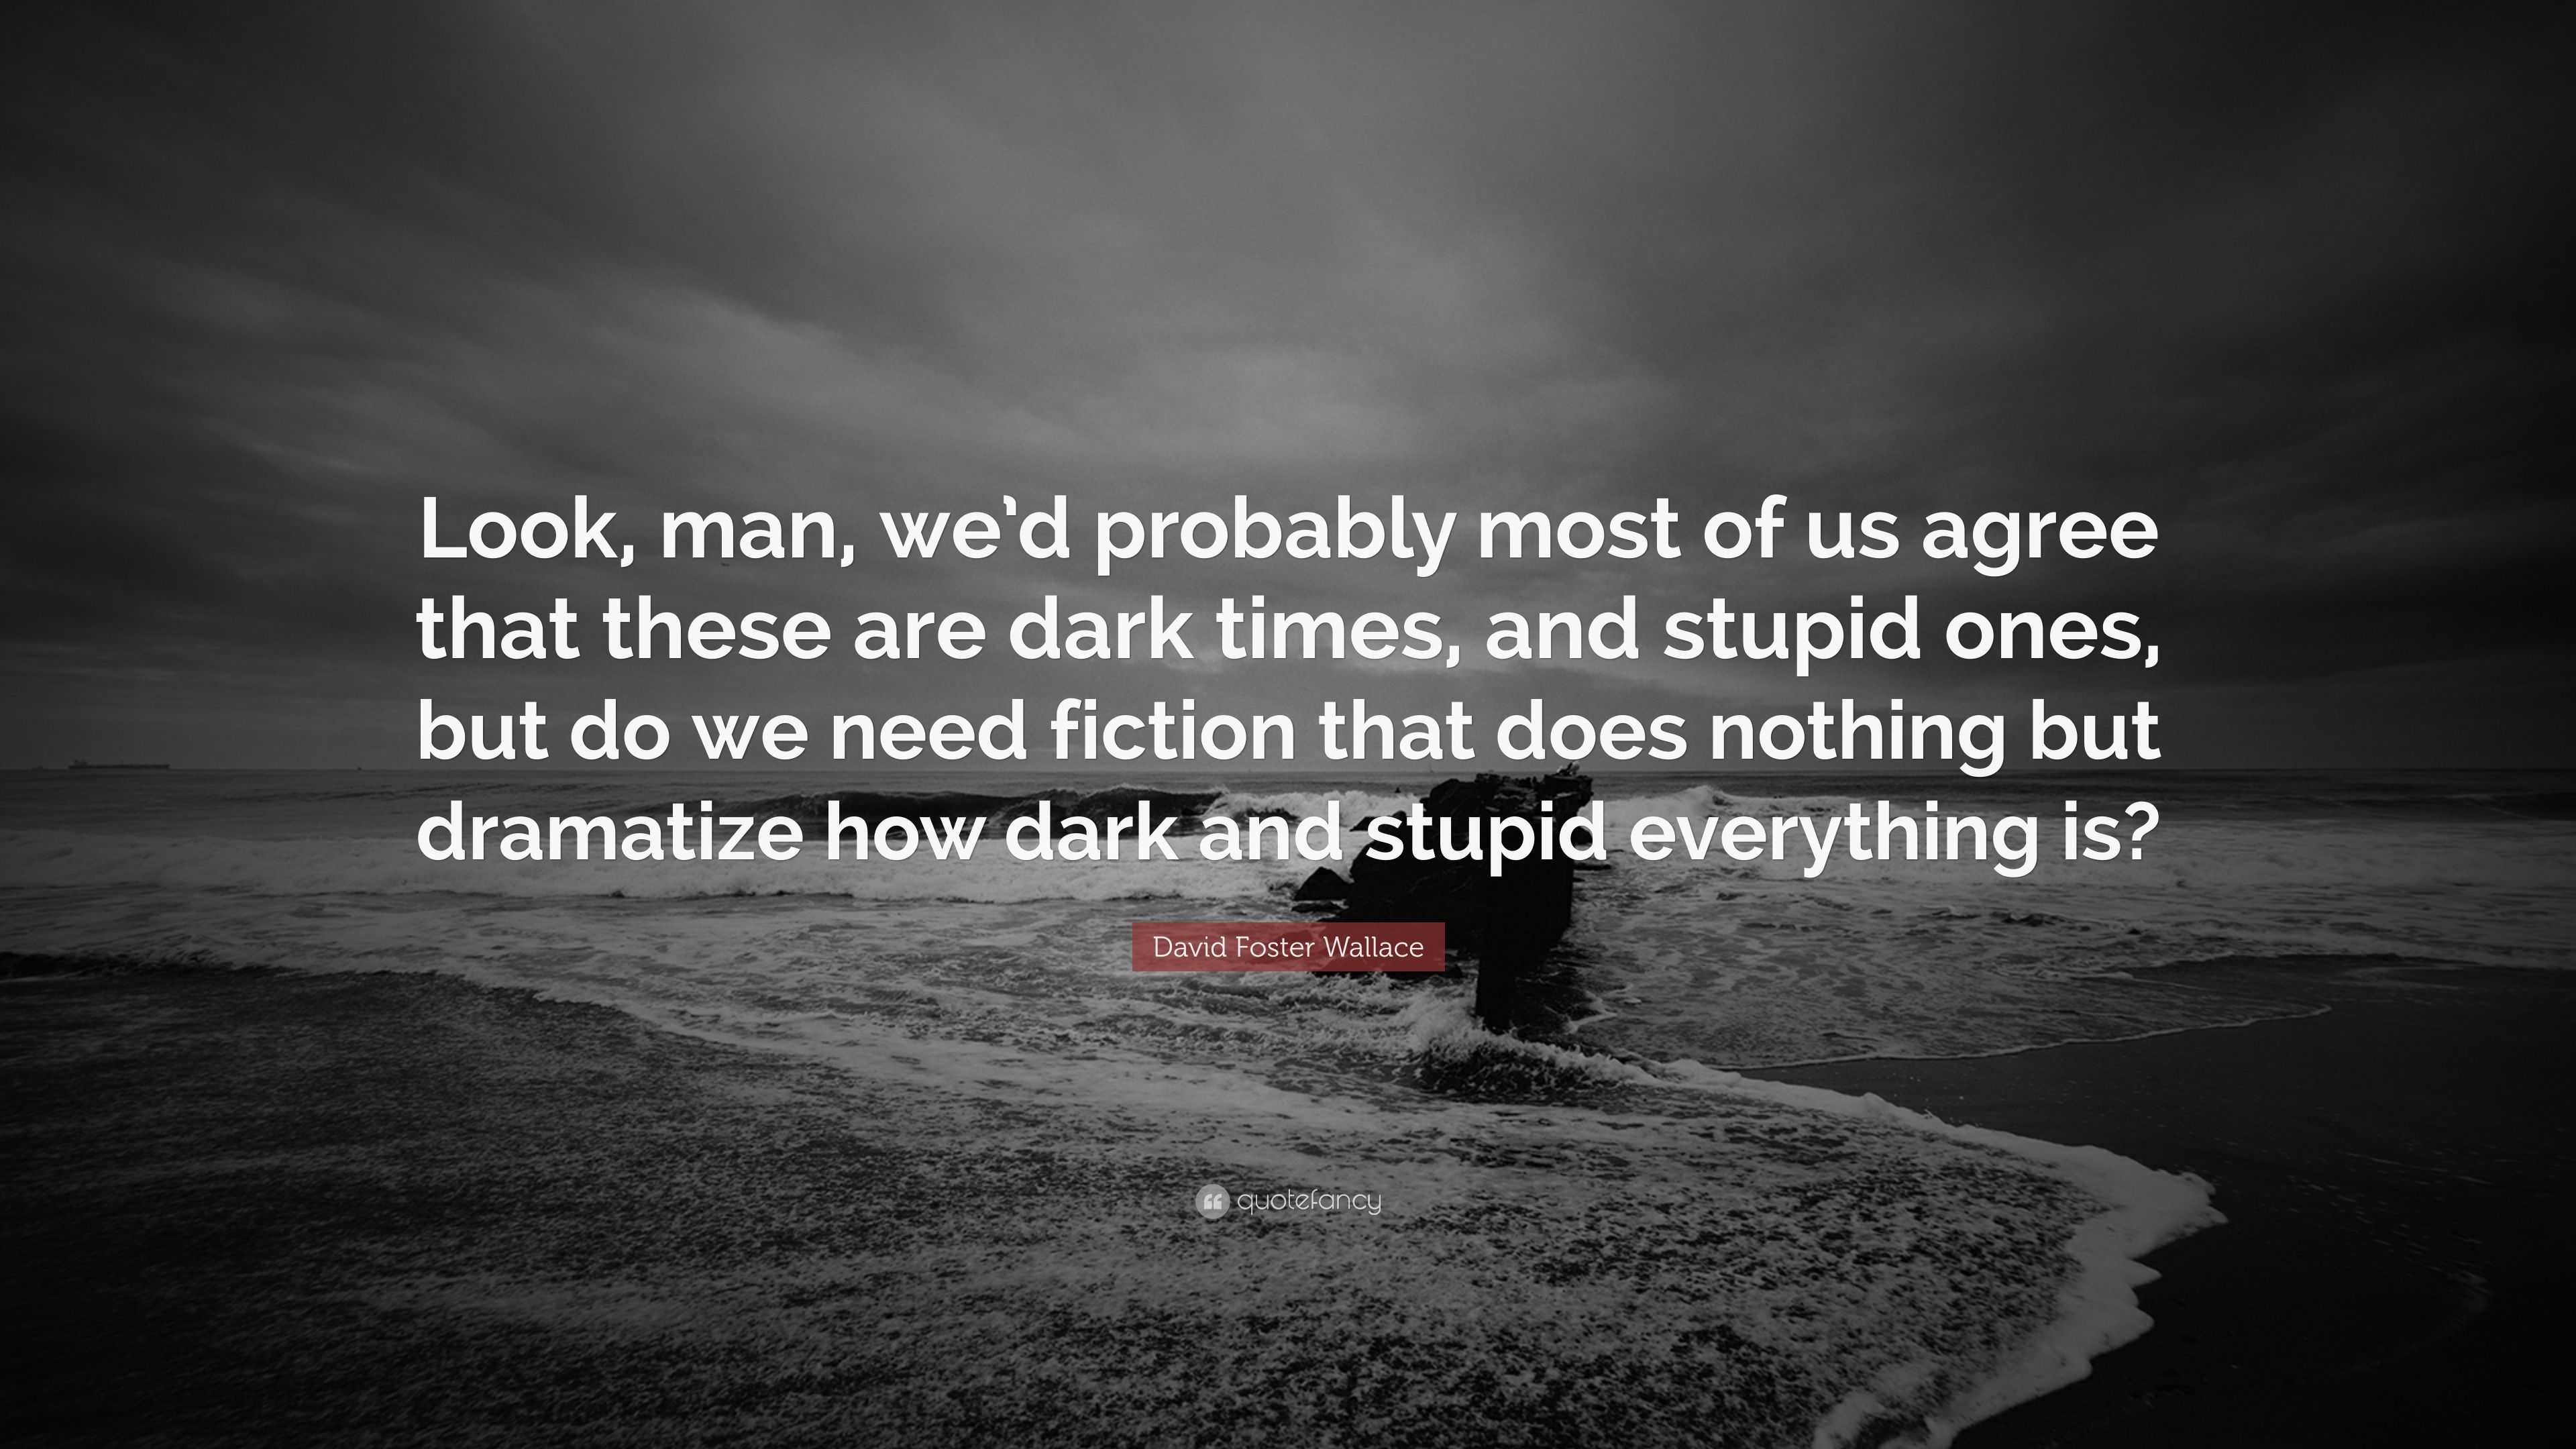 David Foster Wallace Quote: “Look, man, we’d probably most of us agree ...